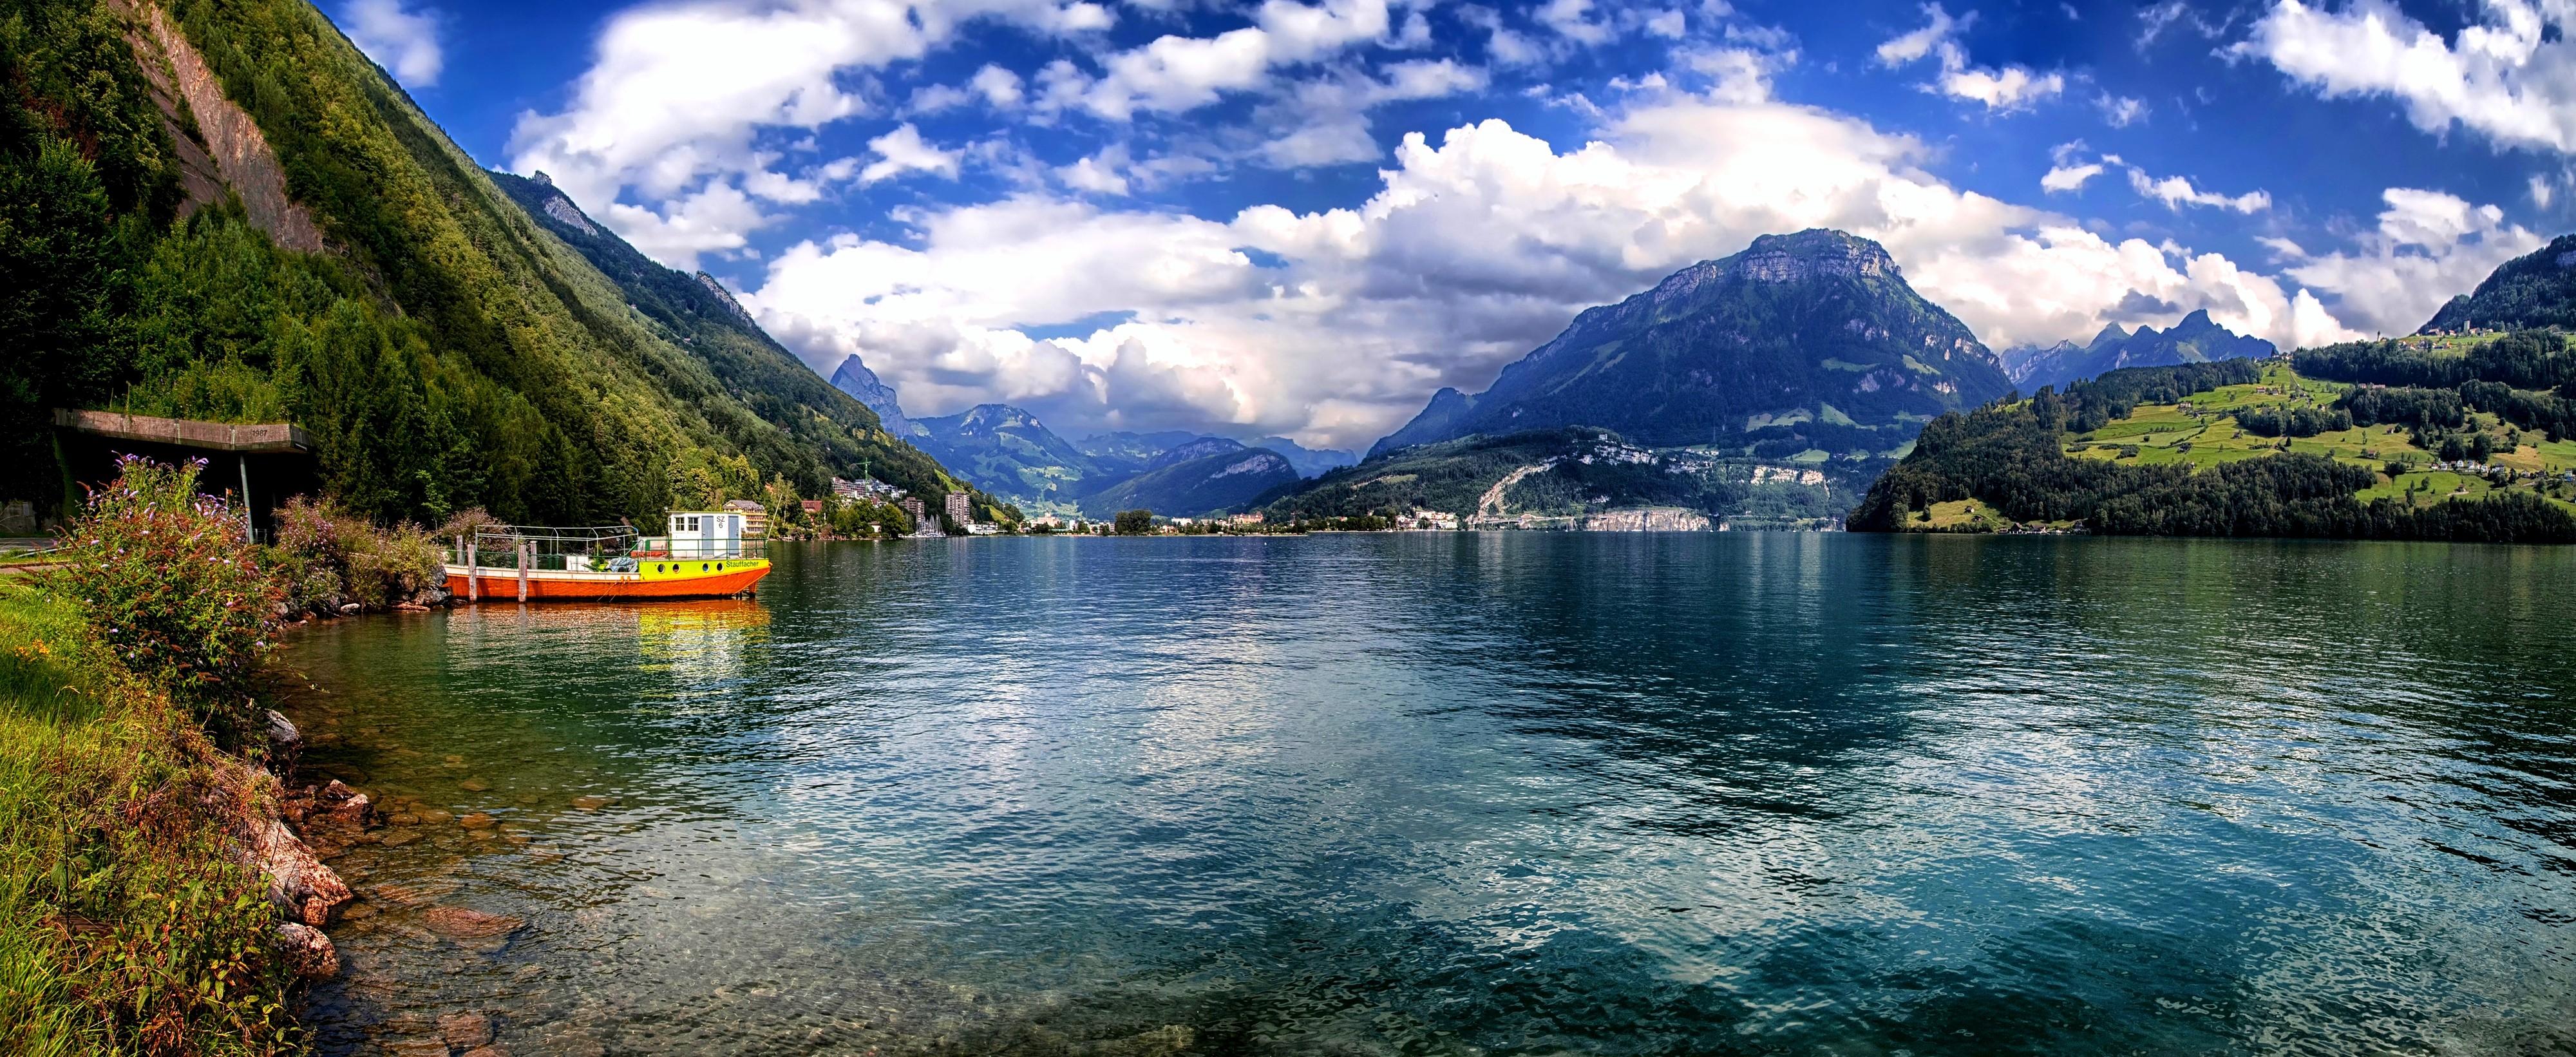 Lake Lucerne Wallpapers - Wallpaper Cave